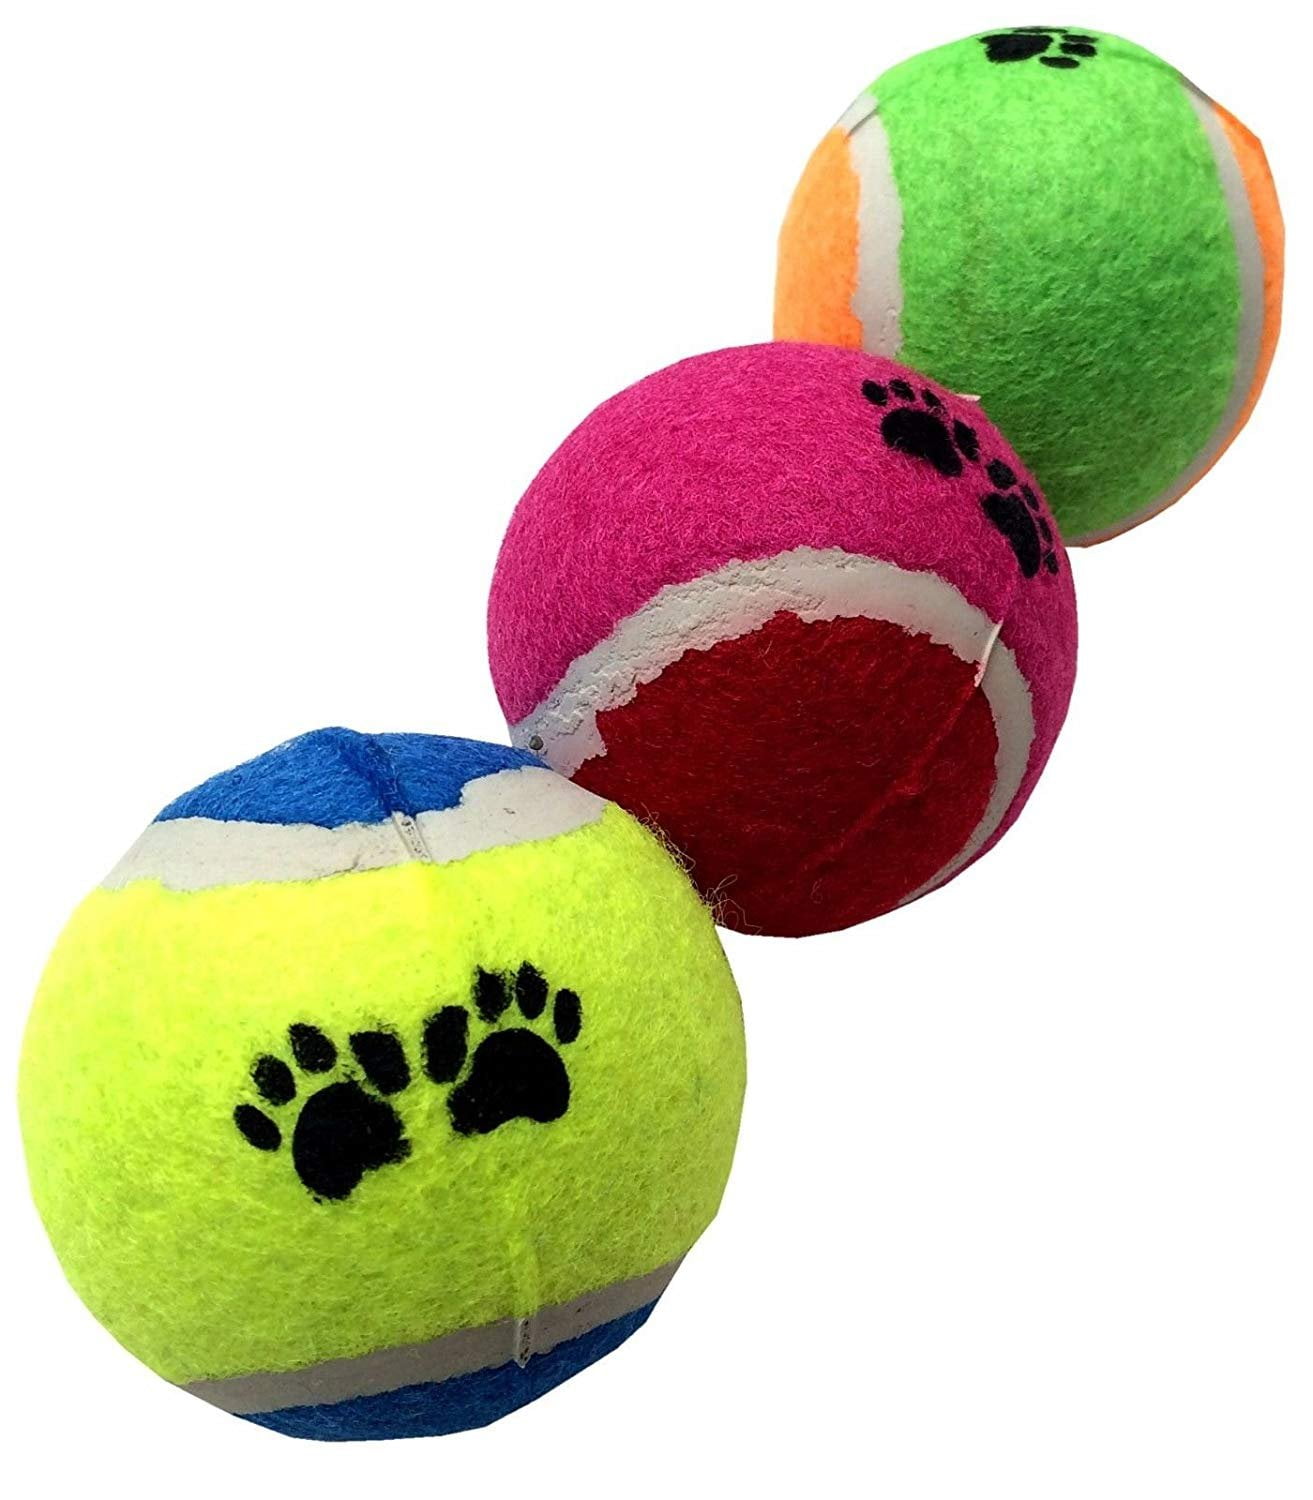 Tennis Balls For Dogs Toy Ball F5X3 M3P1 Y4V0 